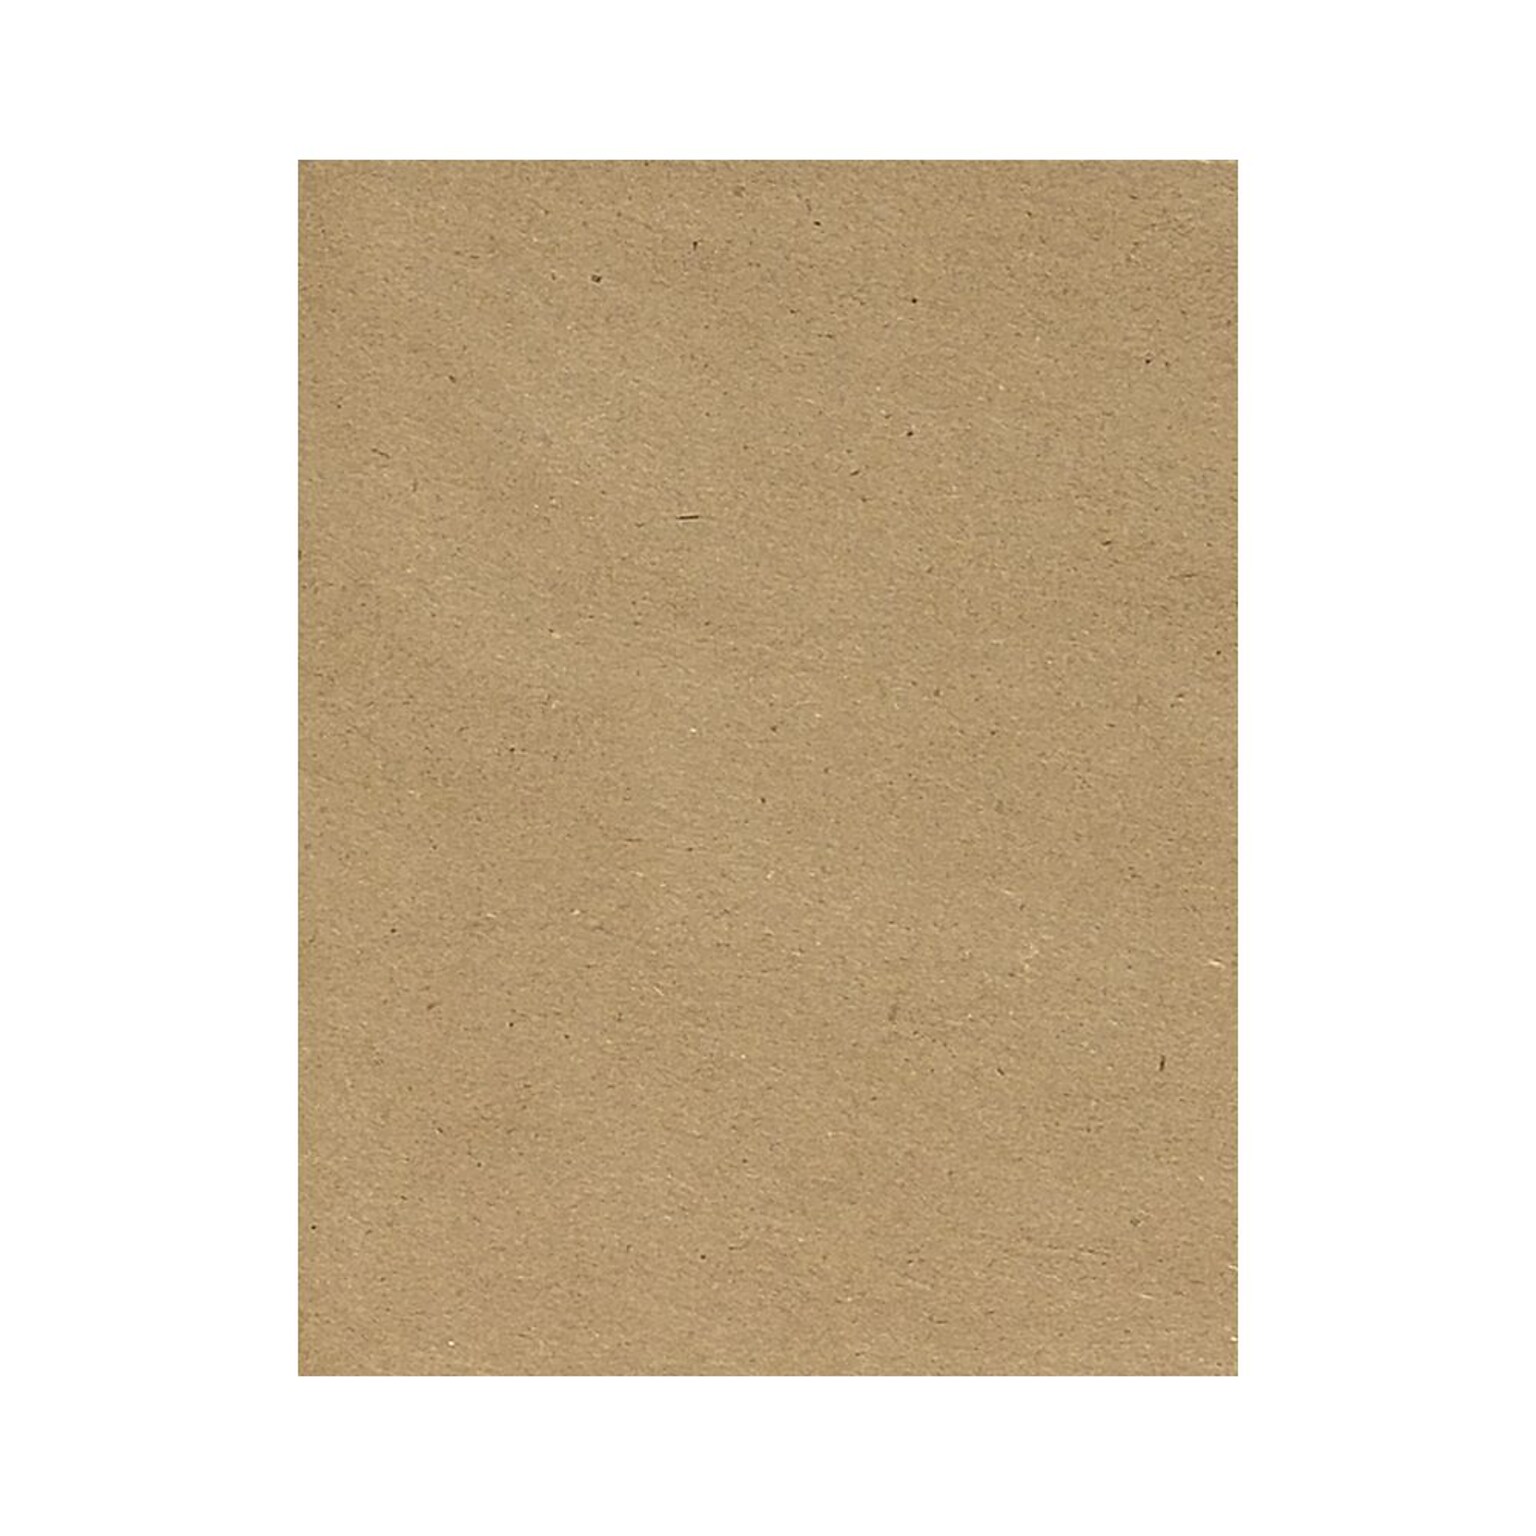 Lux Cardstock 8.5 x 11 inch Grocery Bag 50/Pack